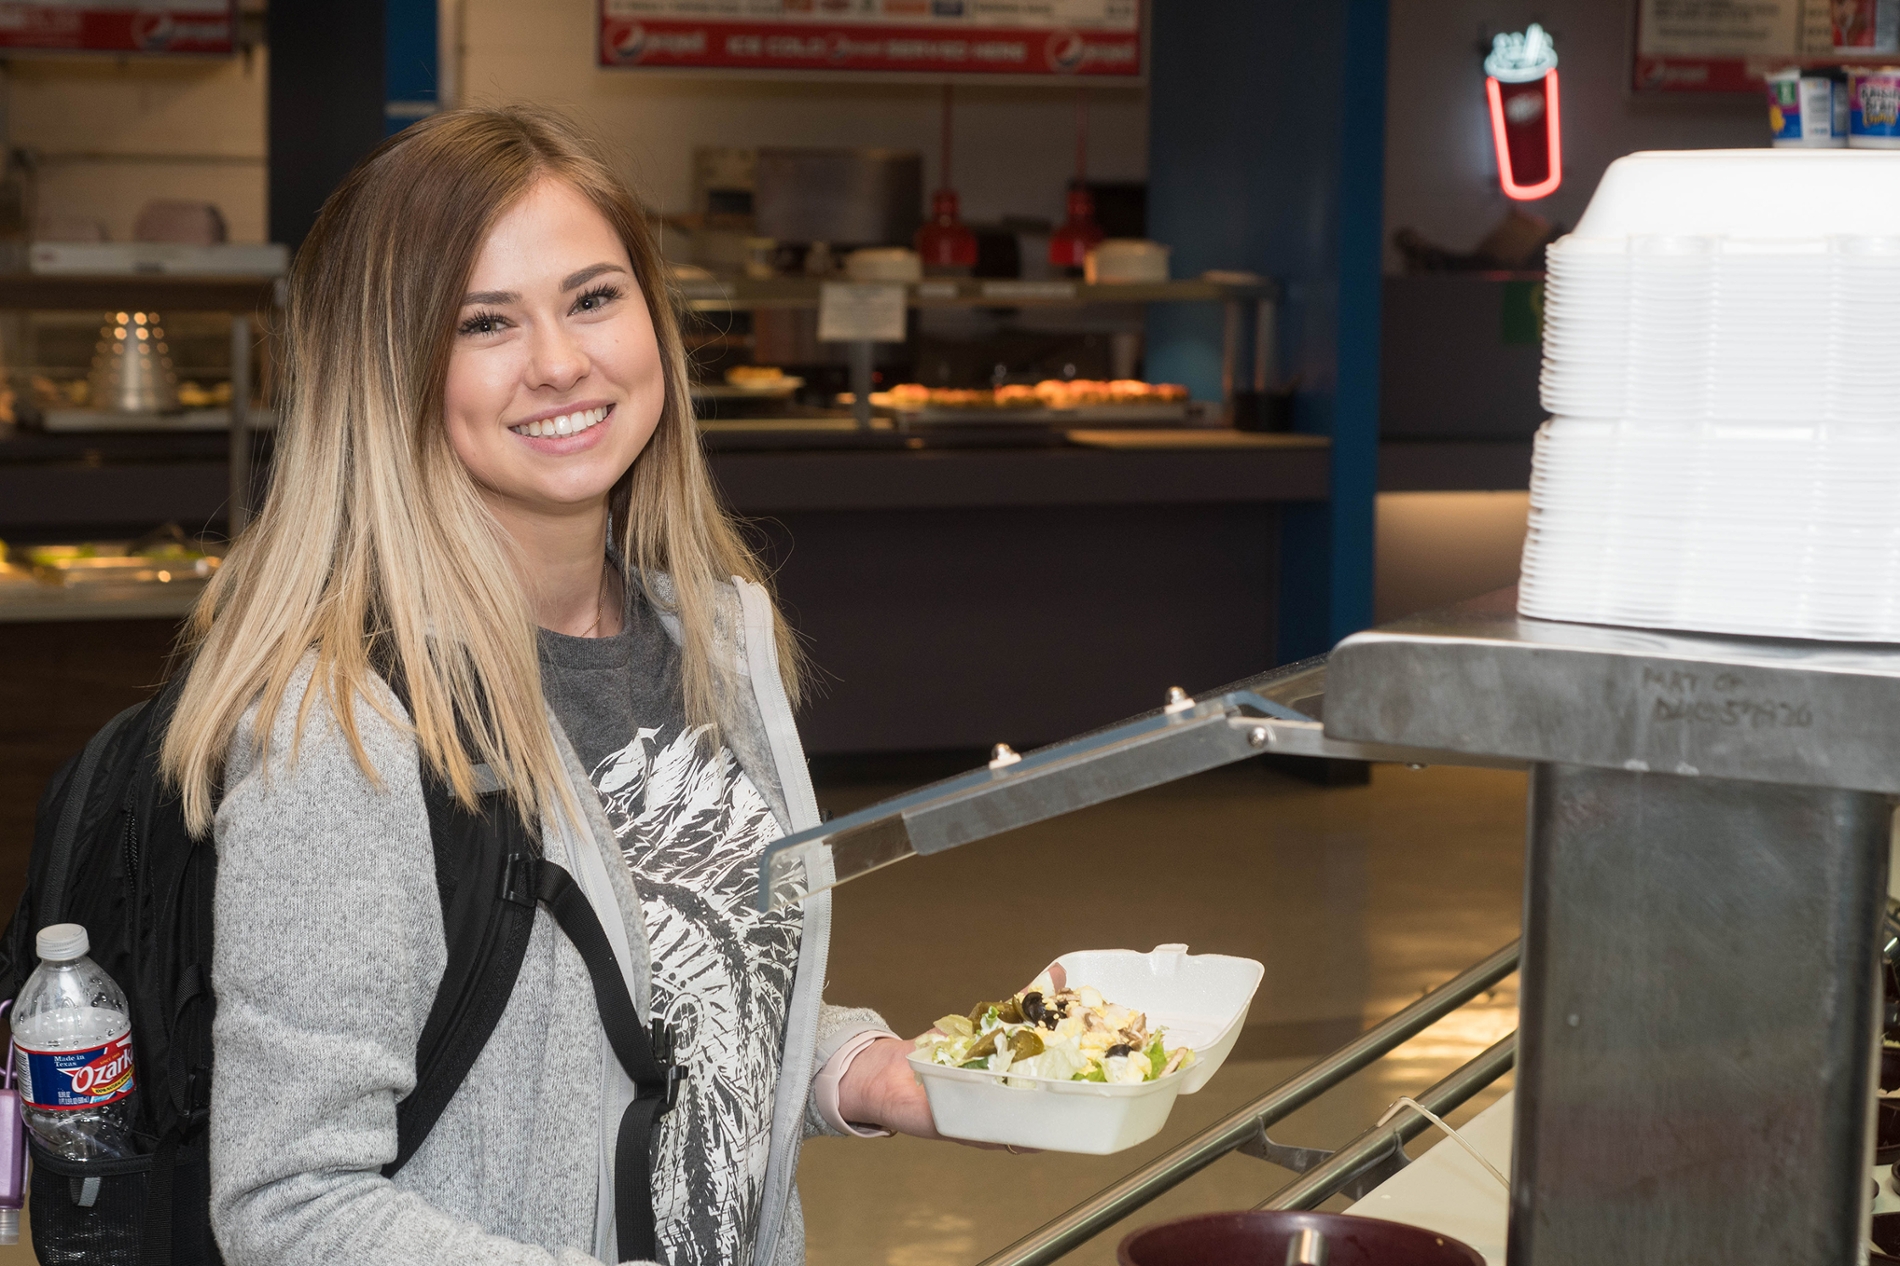 A student prepares a salad at the salad bar at Campus Dining in the Harvin Student Center